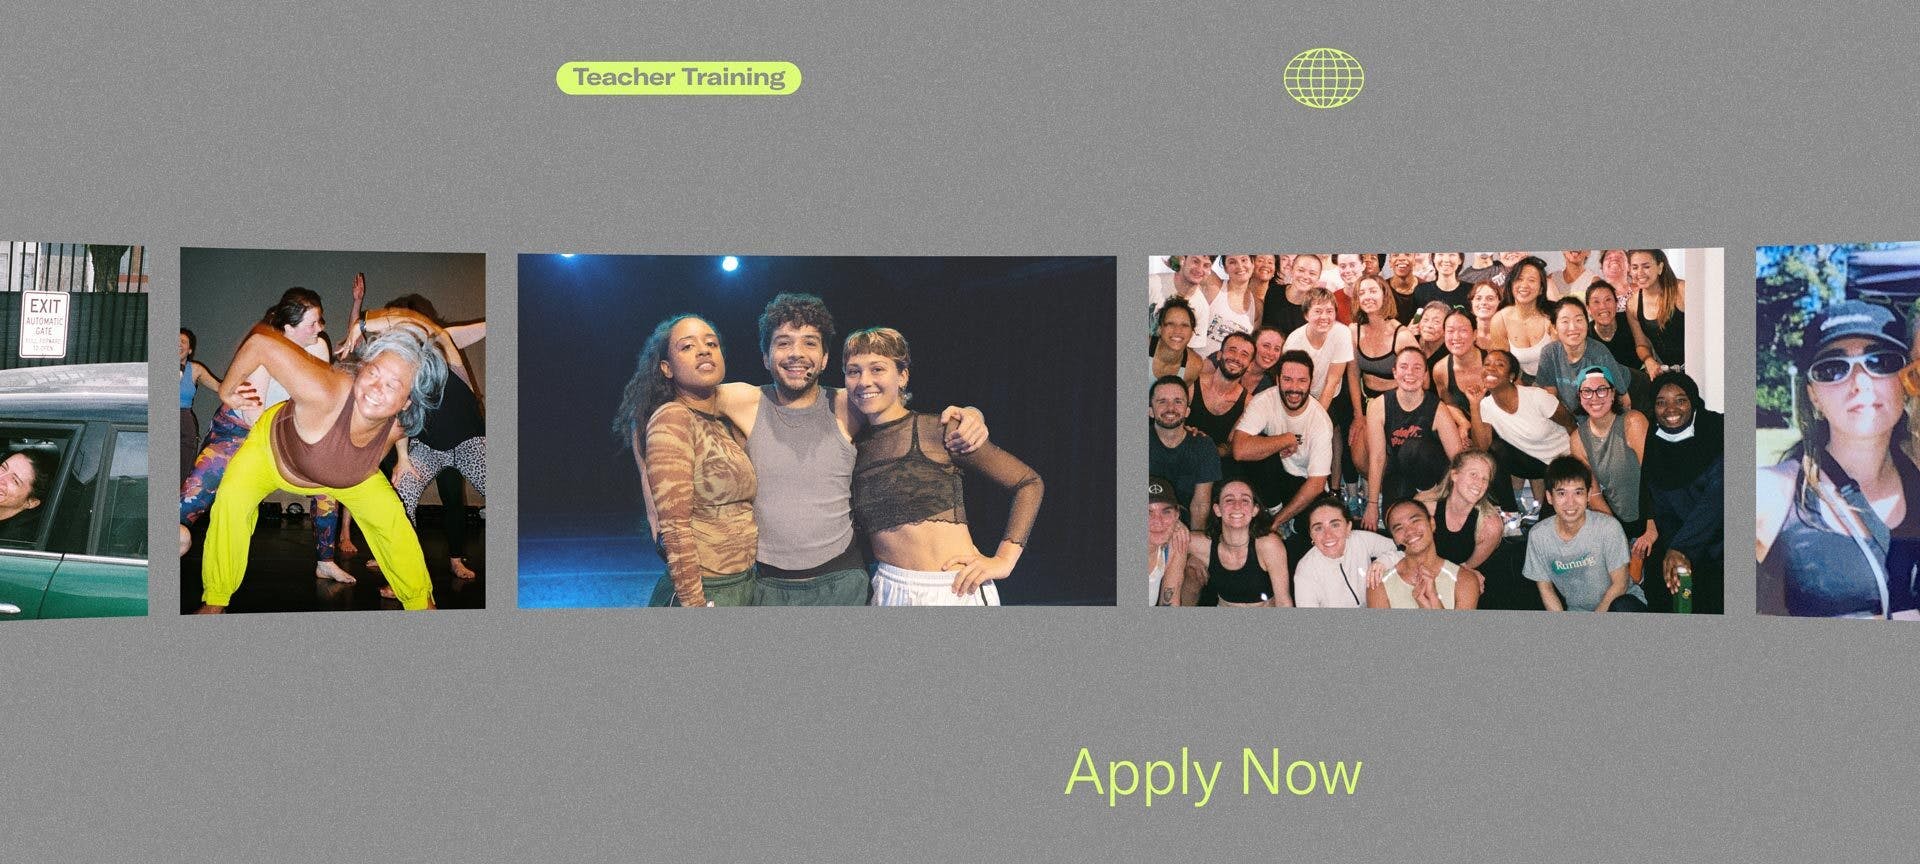 Become a Dance Church Teacher, Bring the Sweat to Your City